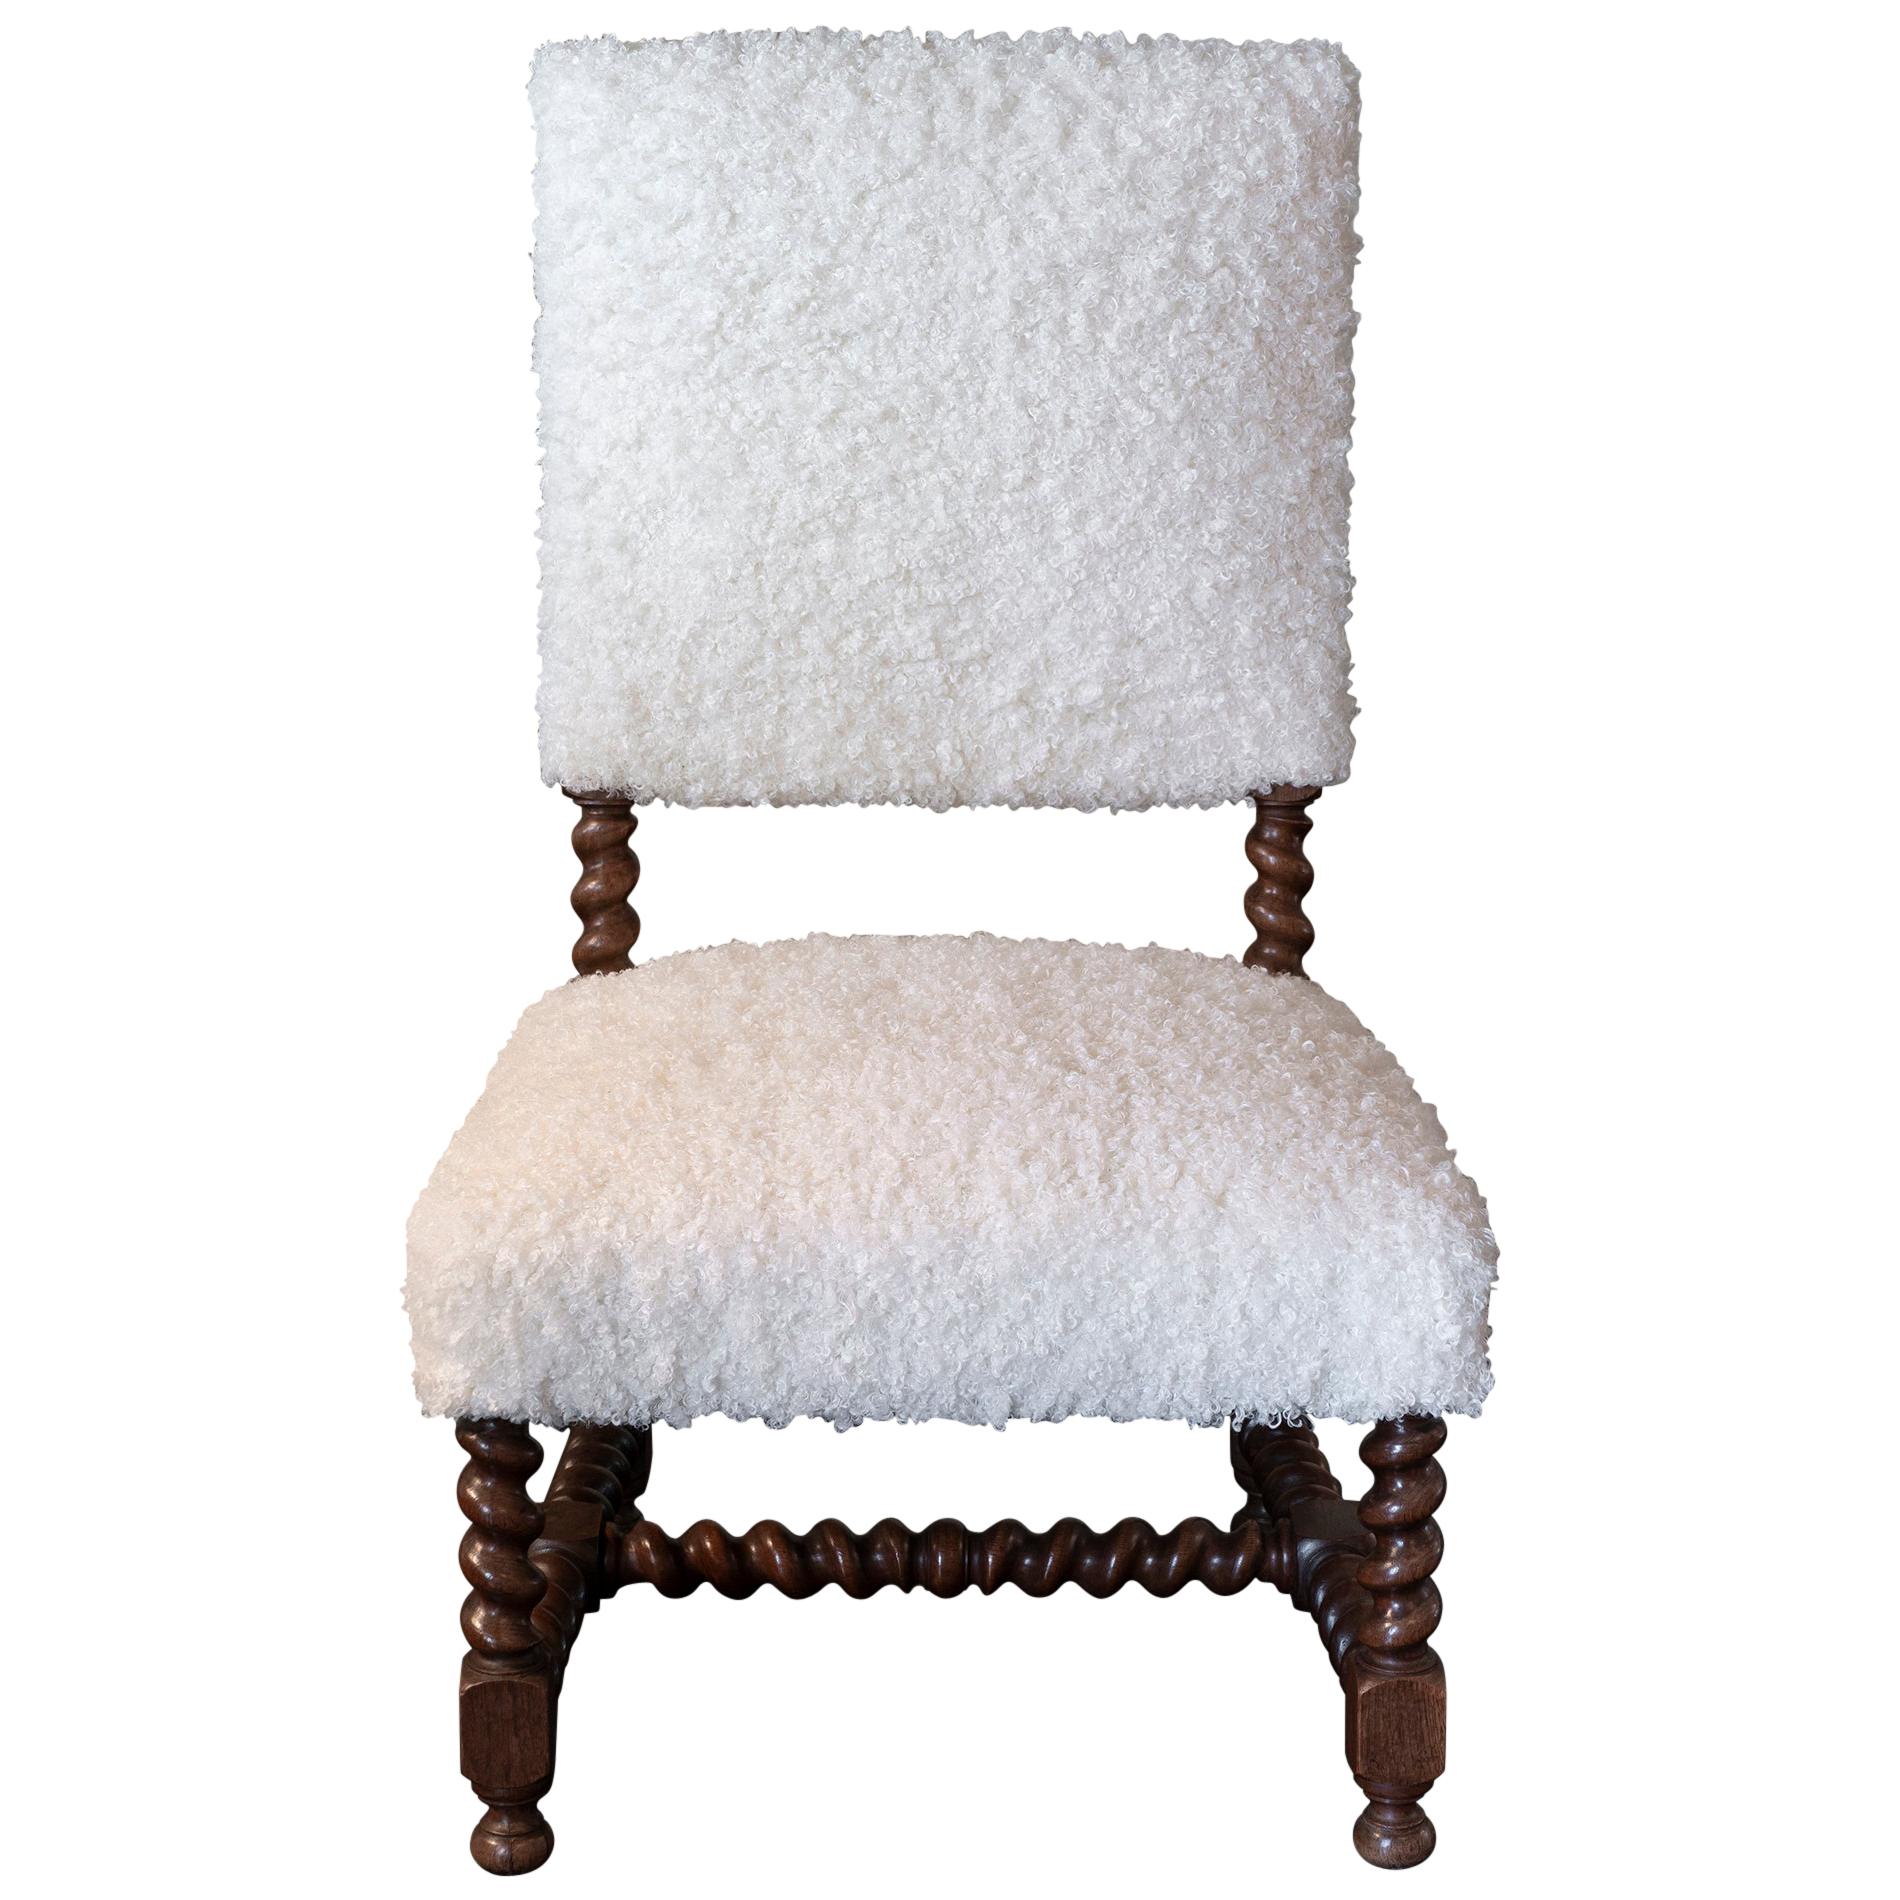 Early 20th Century Italian Chair Walnut and White Curly Wool Fabric